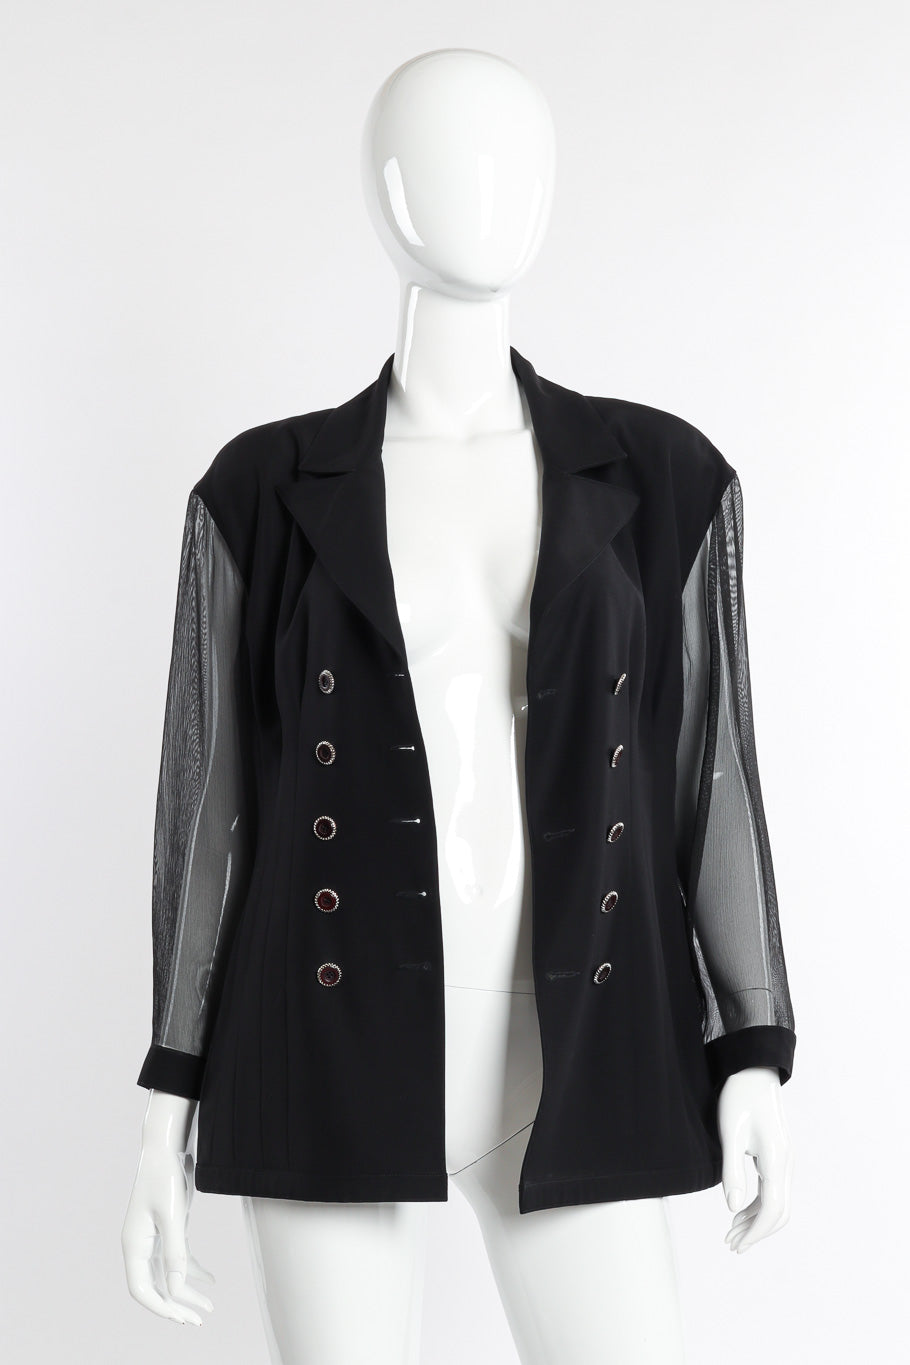 Vintage Karl Lagerfeld Double Breasted Sheer Jacket unbuttoned front on mannequin @recessla